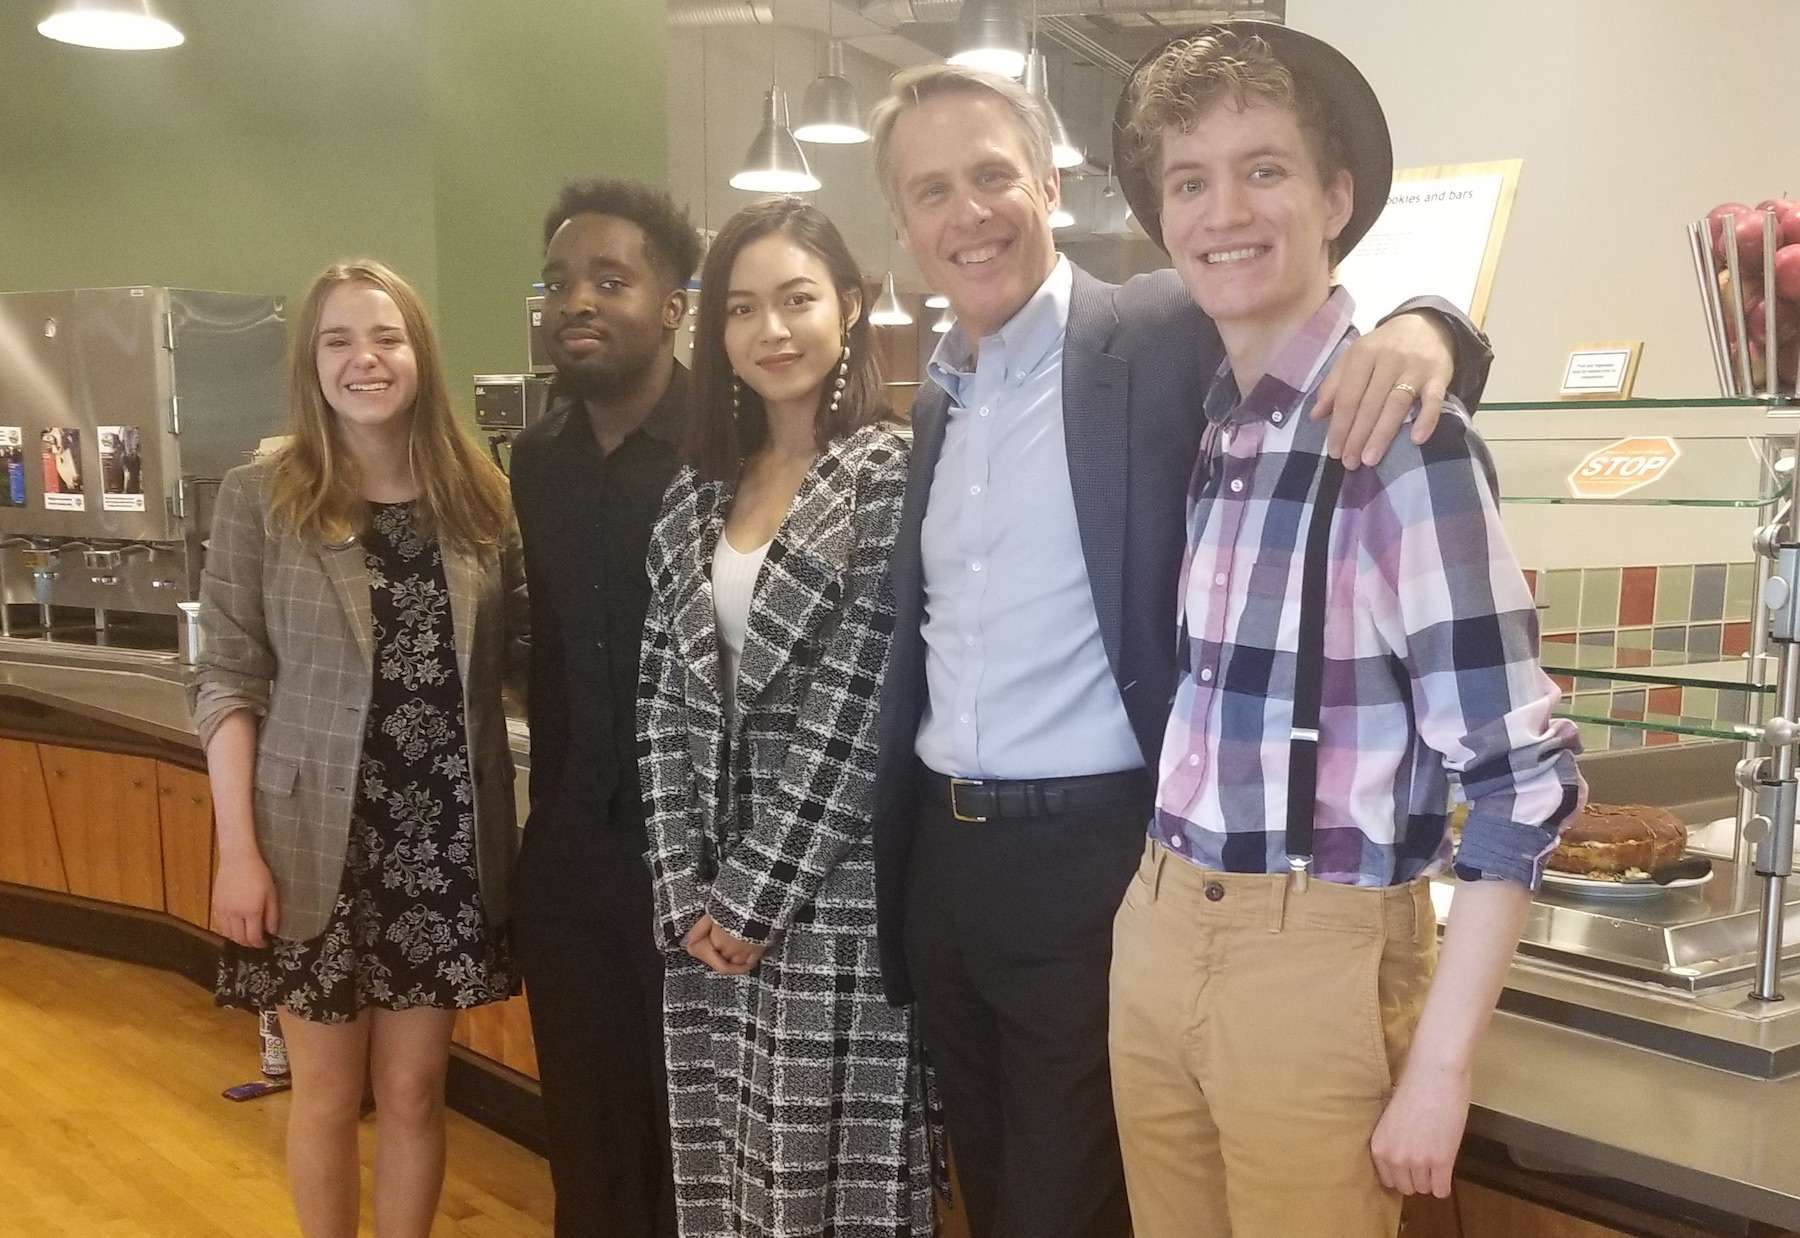 Terry Moran poses with four Lawrence students inside Andrew Commons.